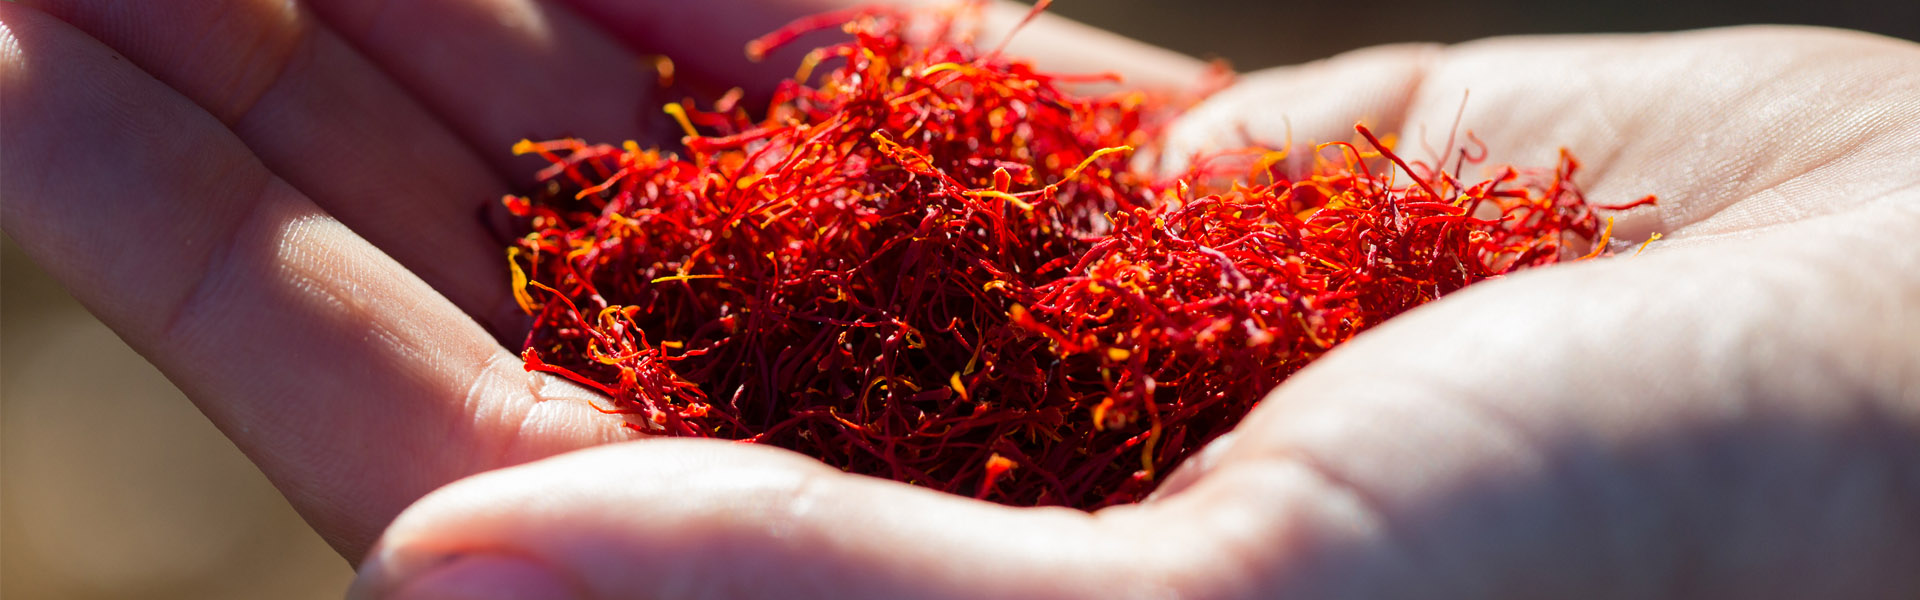 Saffron in hand, credit Greg Elms and North East Tourism